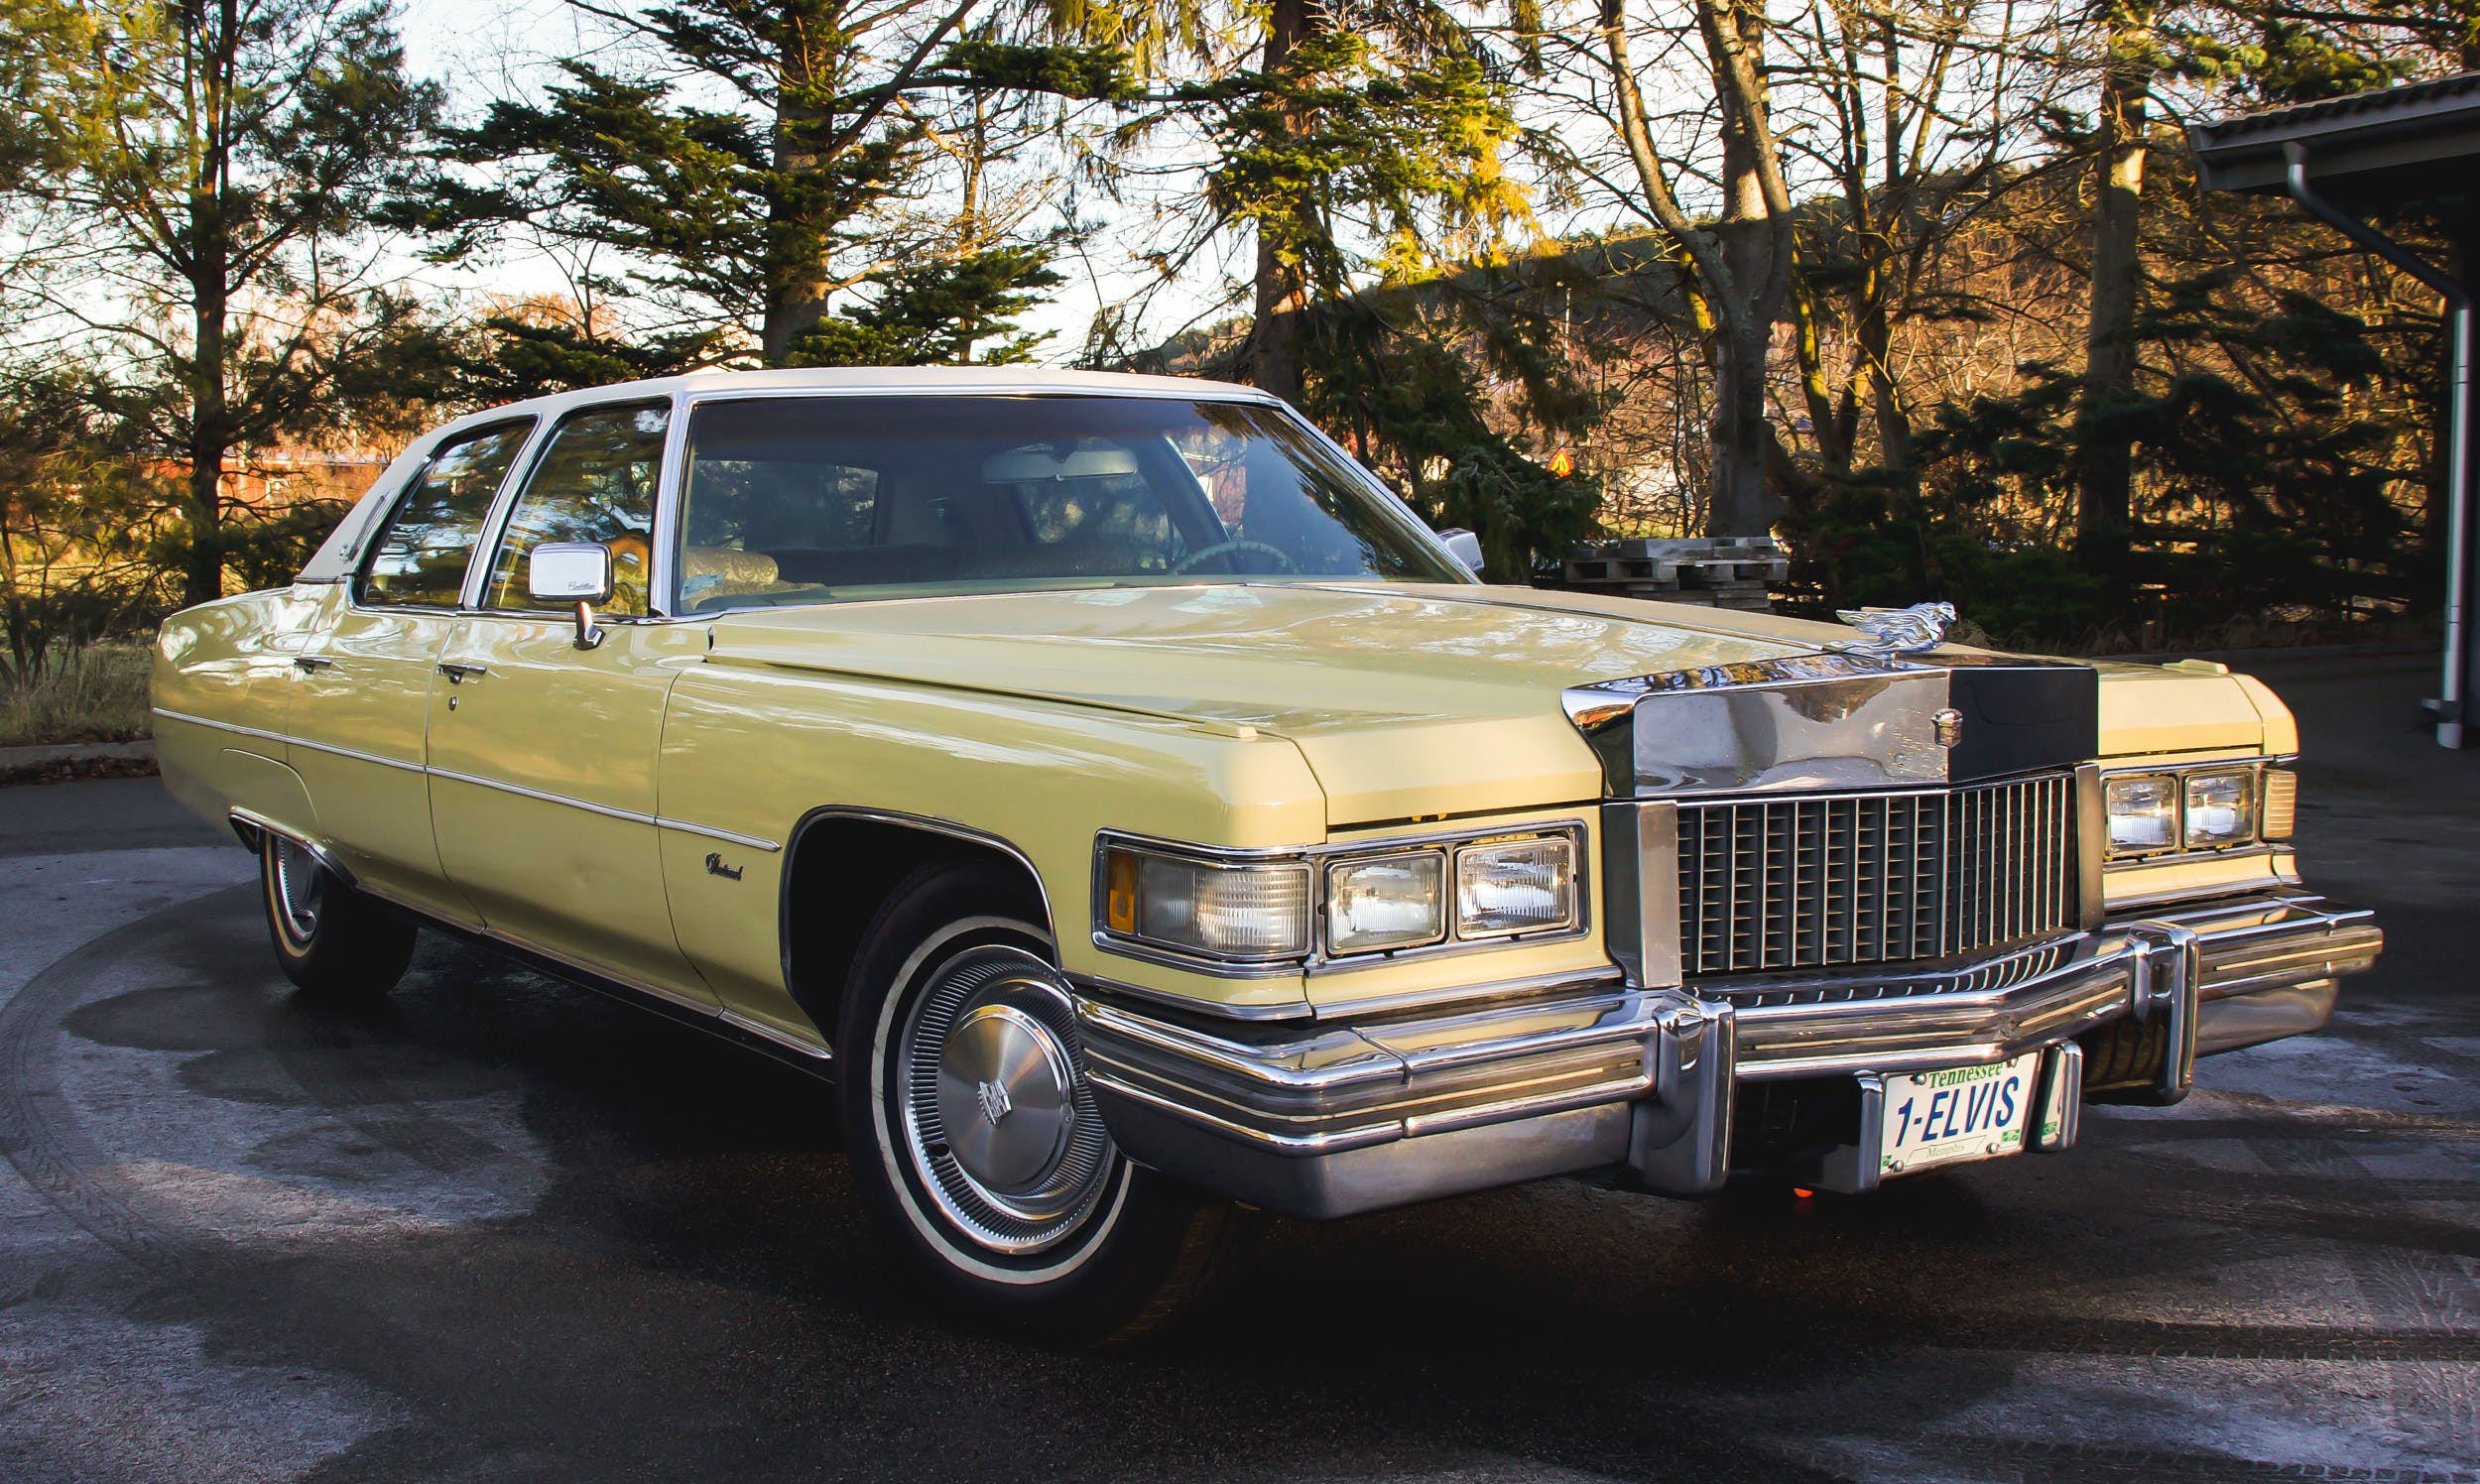 Drive like a king – or The King – in this 1975 Cadillac